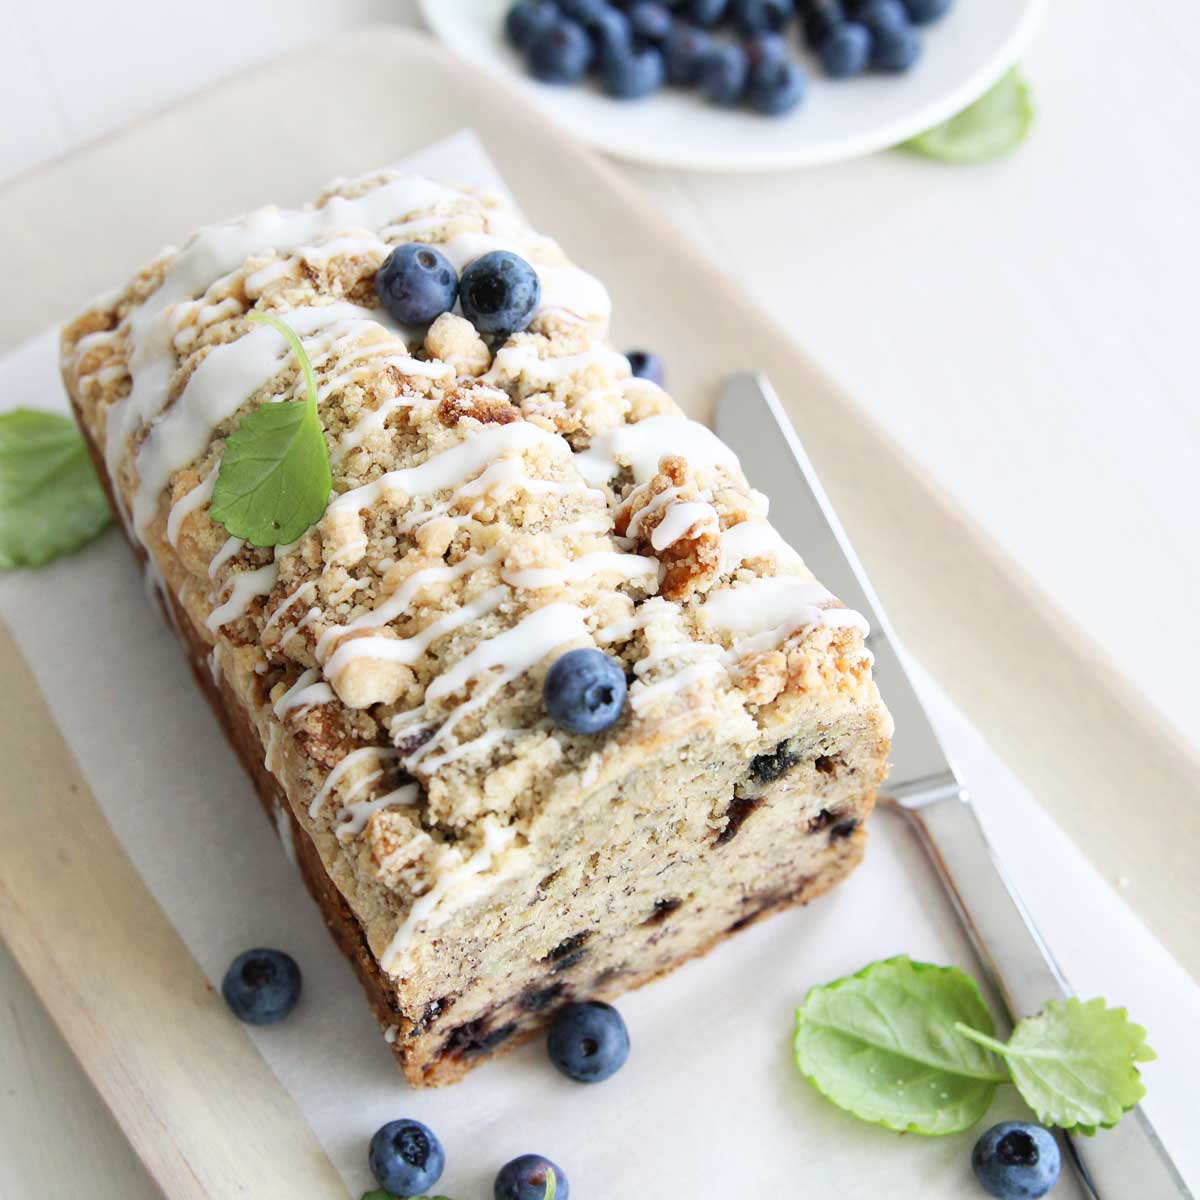 Blueberry Banana Bread with Oats & Streusel (Eggless, Dairy Free) - Frosting